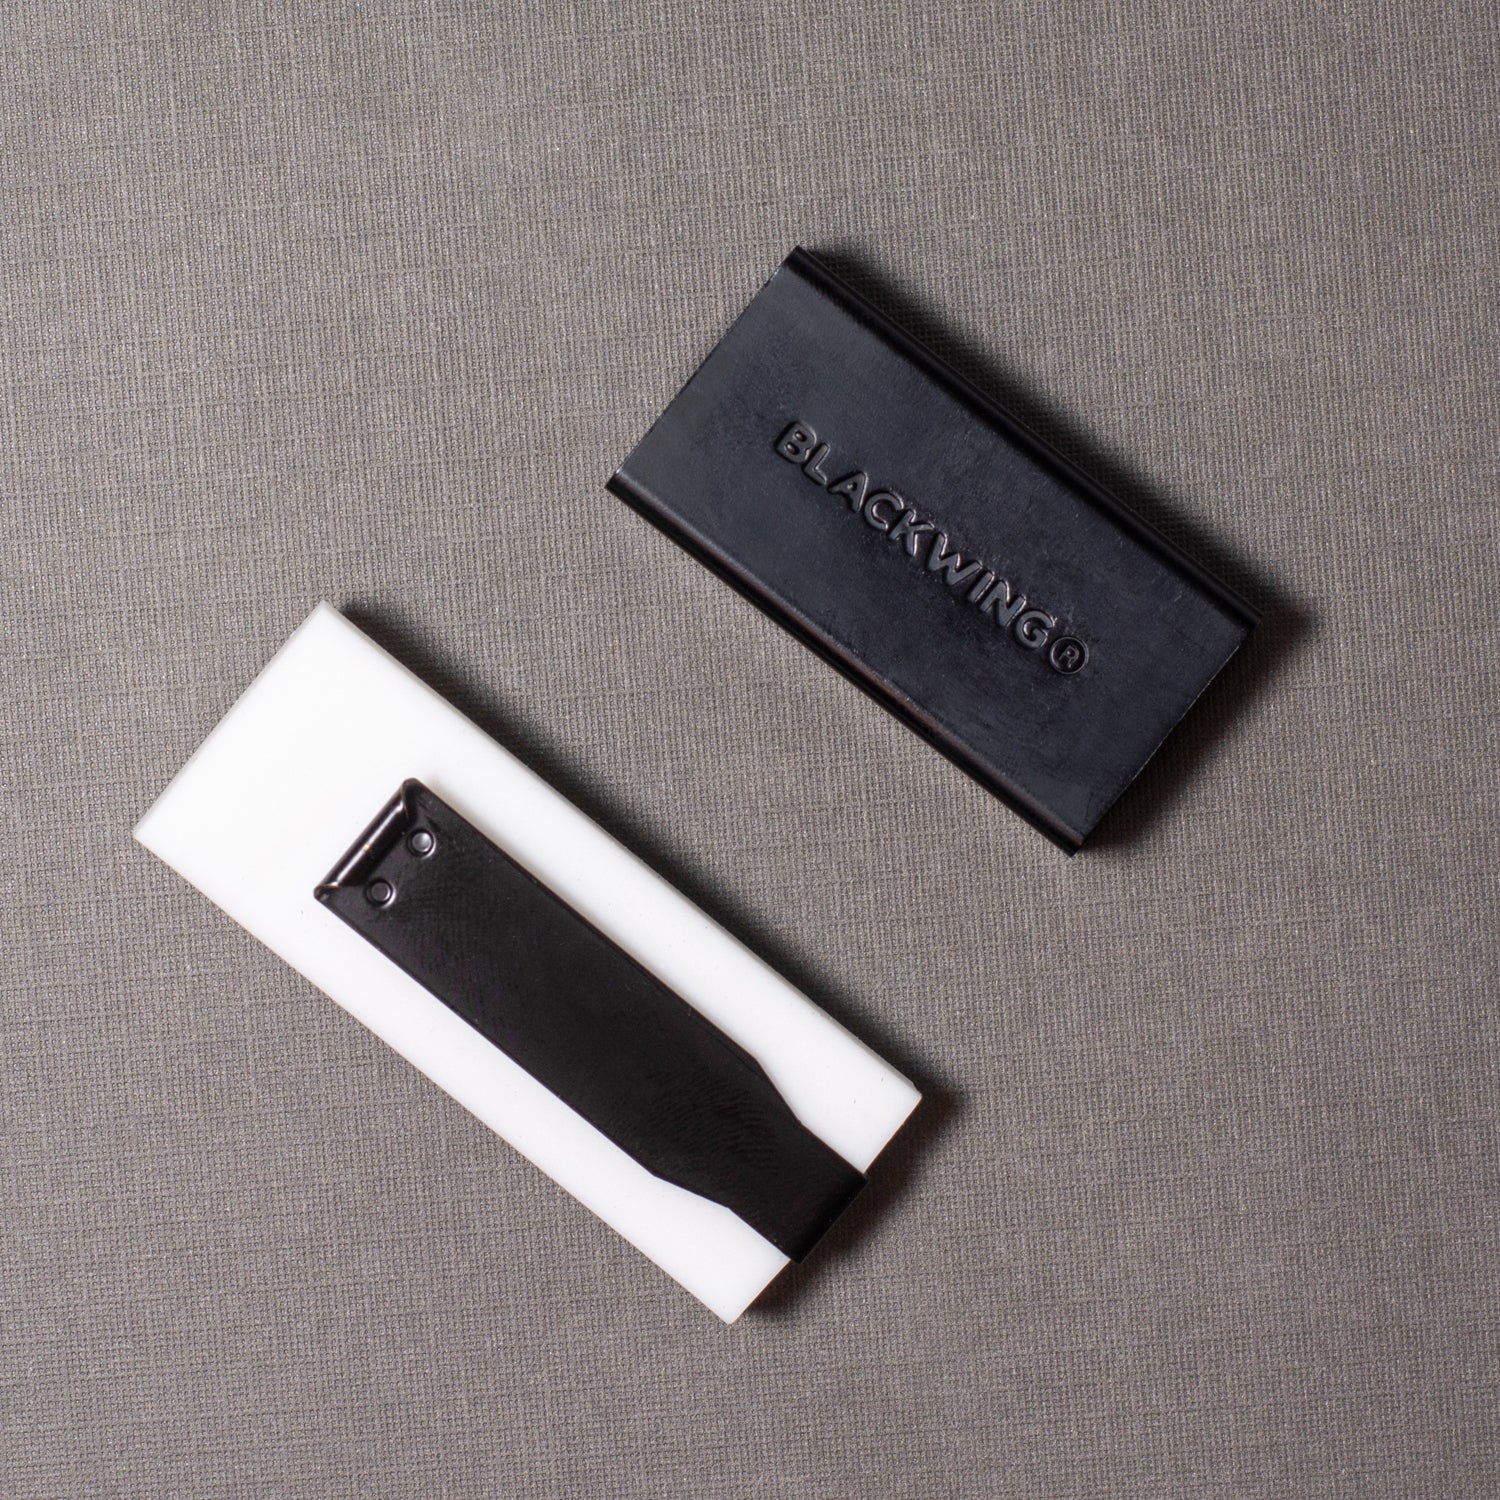 A rectangular object in black and white with a Blackwing Handheld Eraser Replacements - Set of 3.